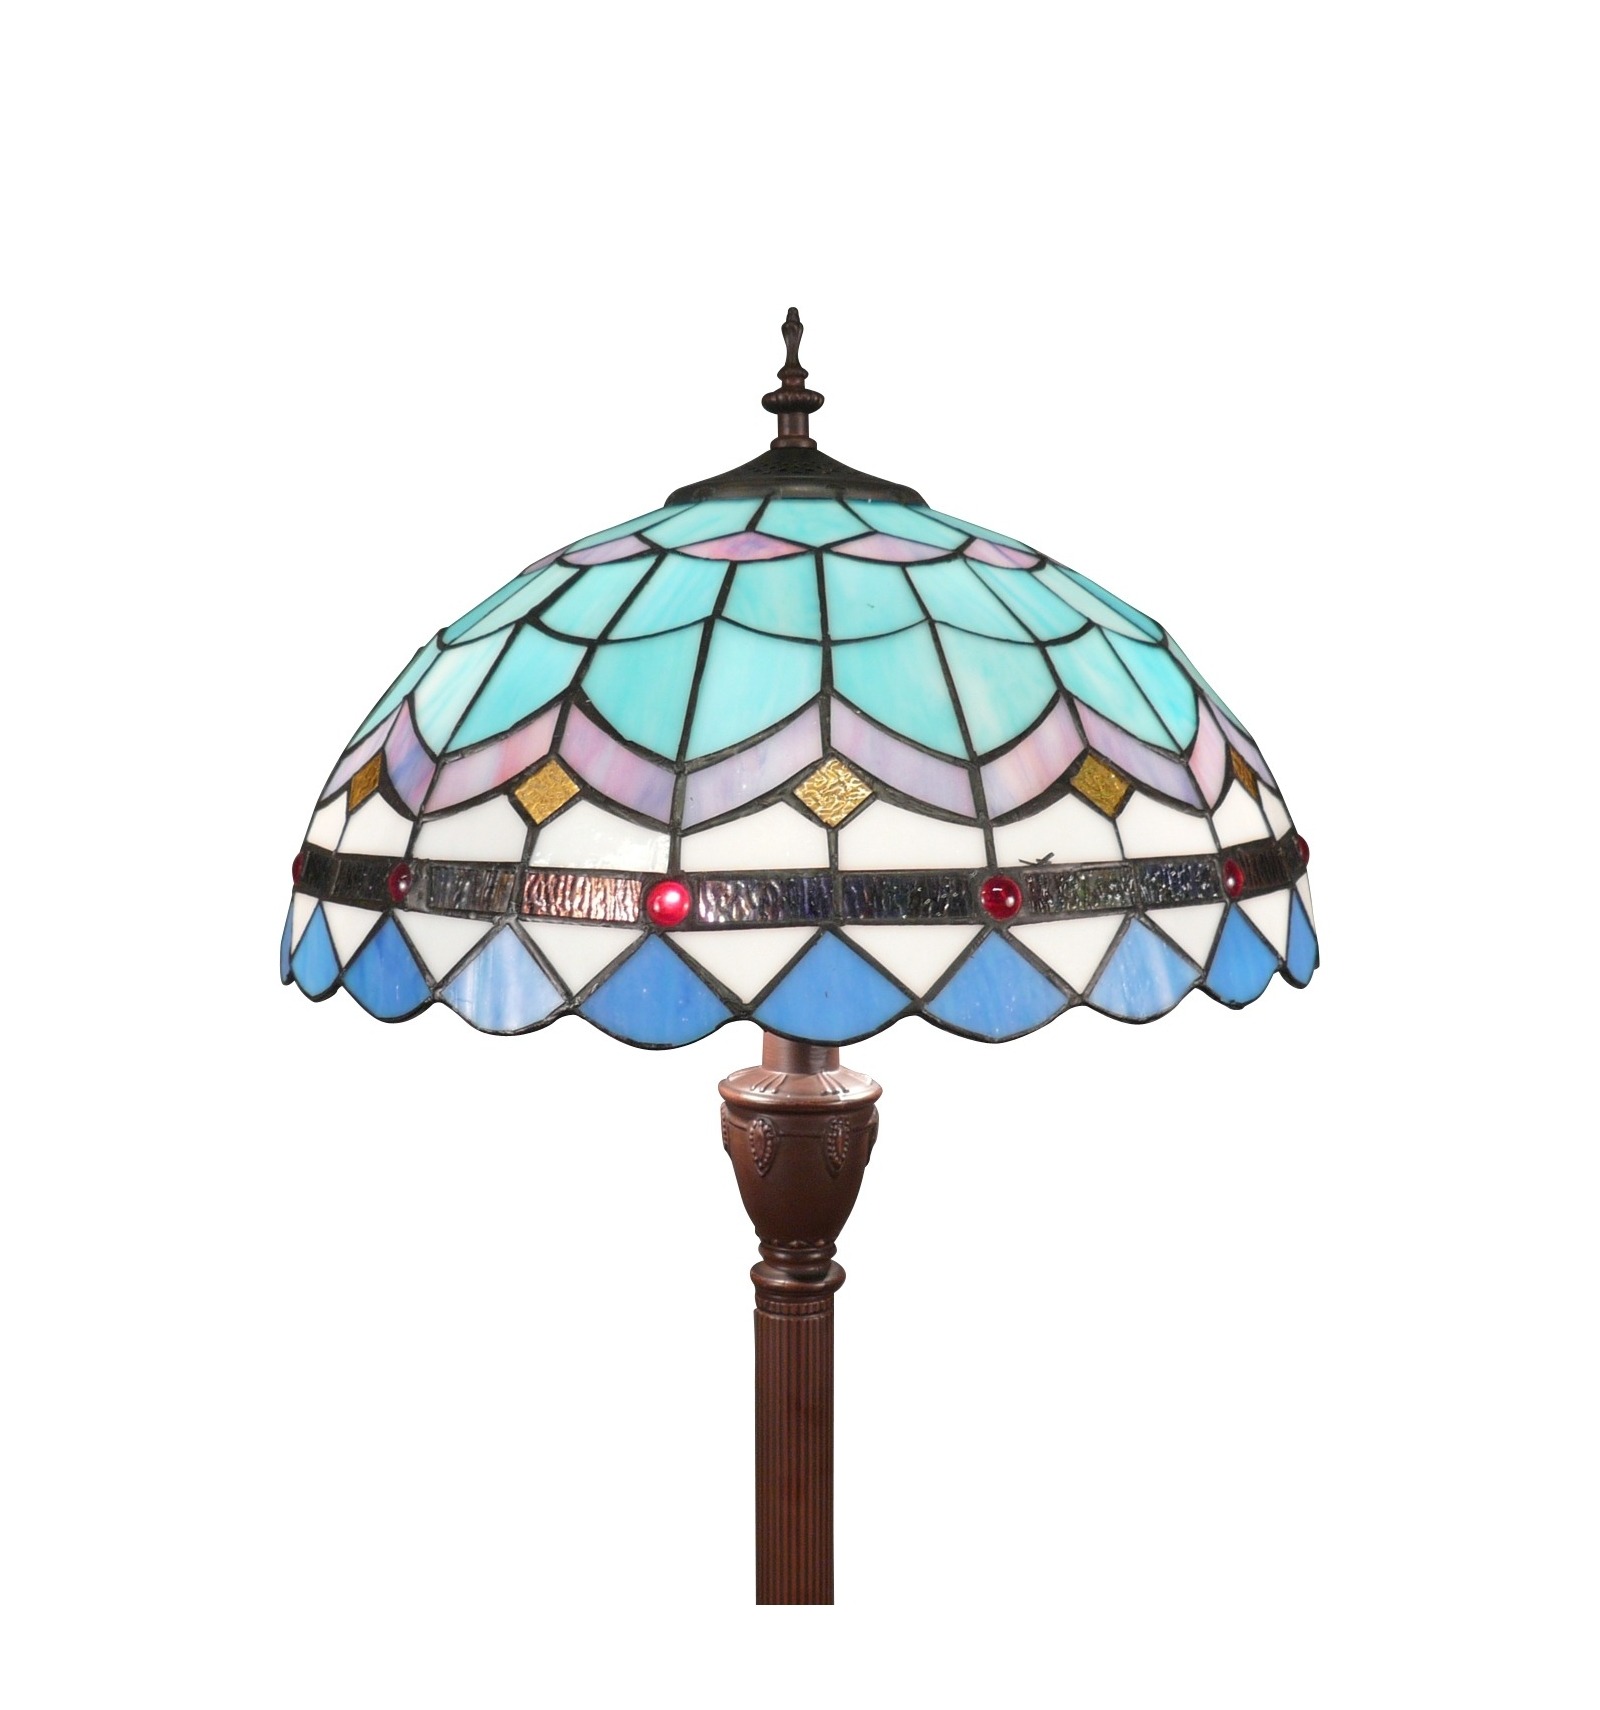 Tiffany floor lamp blue from the Mediterranean series - Tiffany lamps